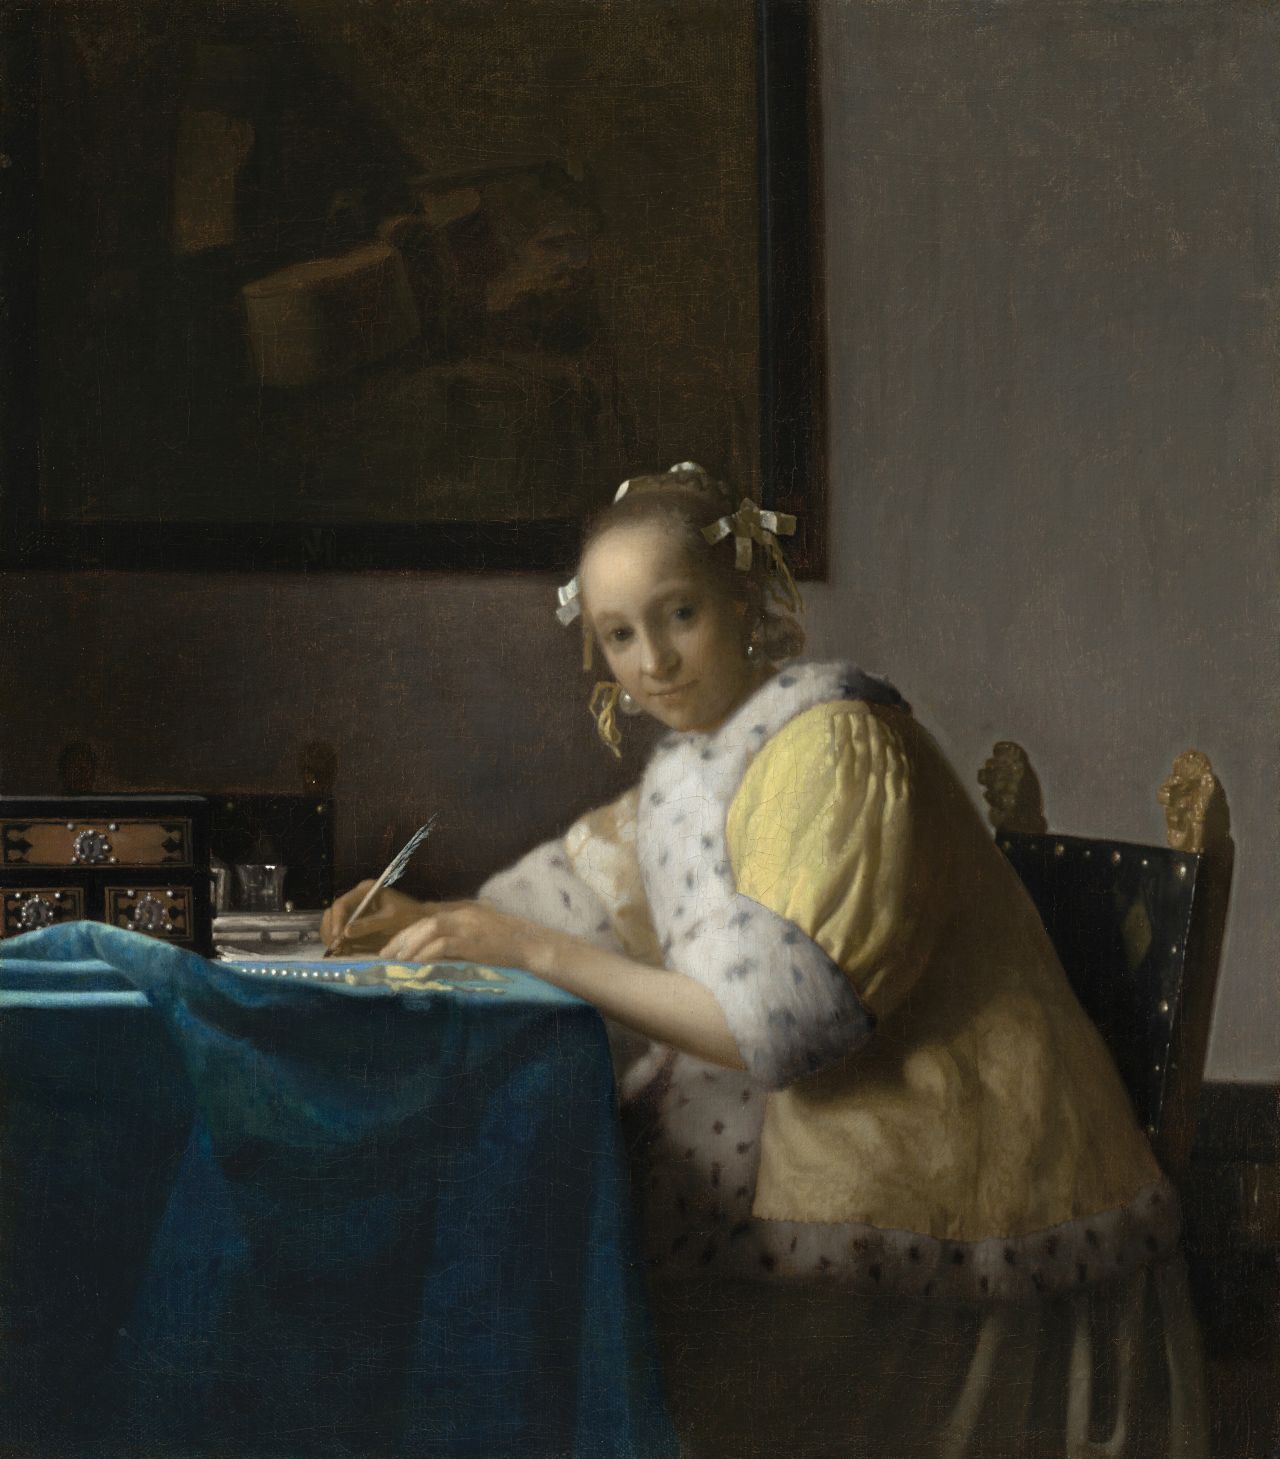 "A Lady Writing" underwent several adjustments, according to the exhibition's research.